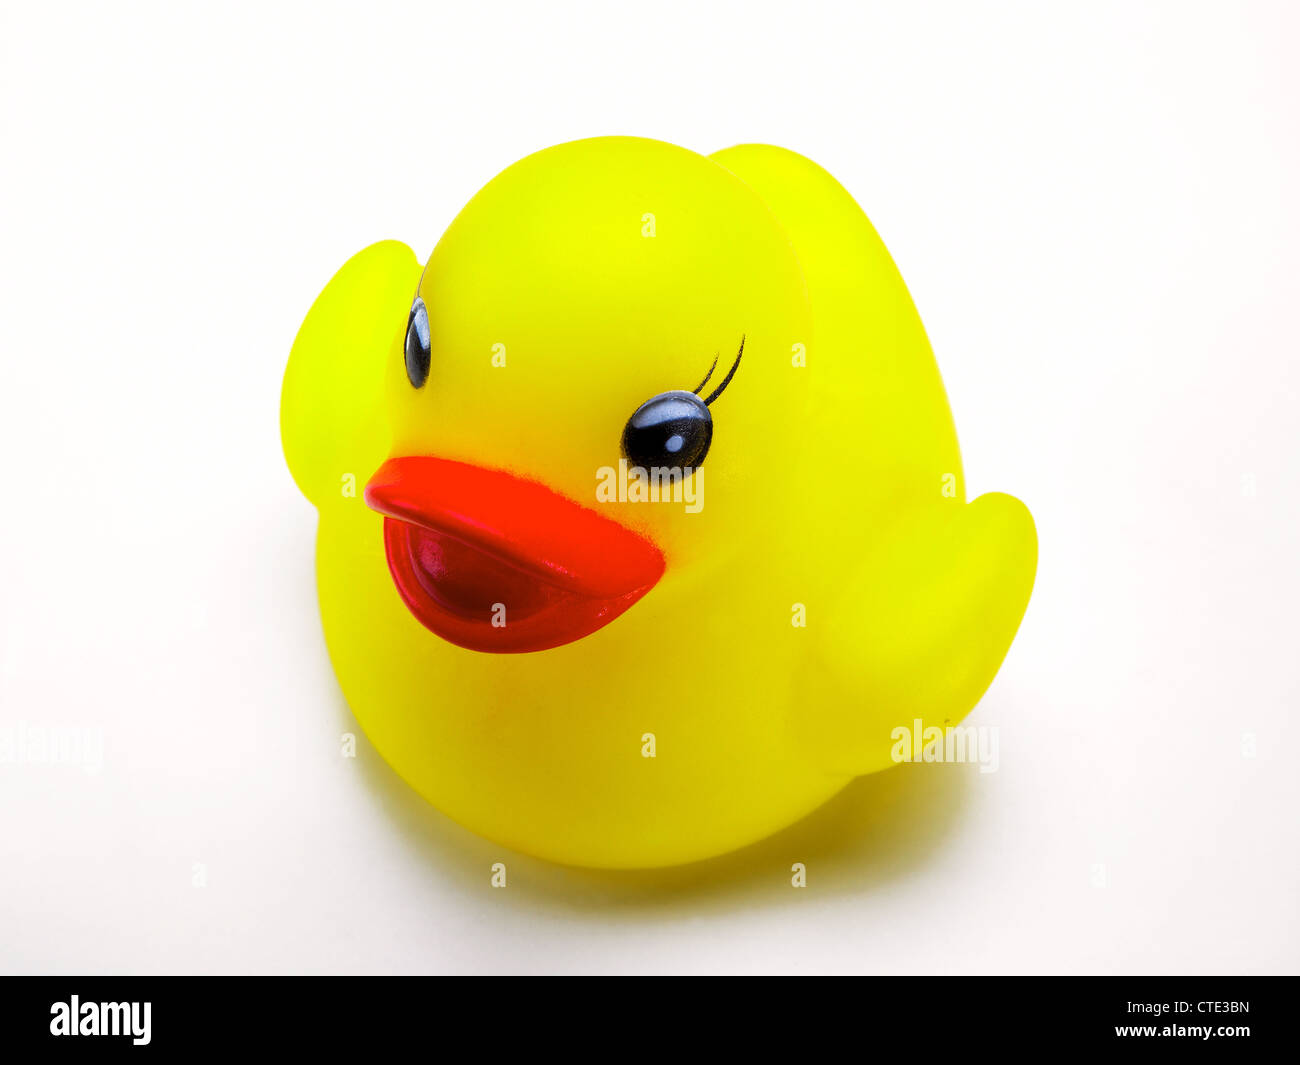 A rubber duck Stock Photo